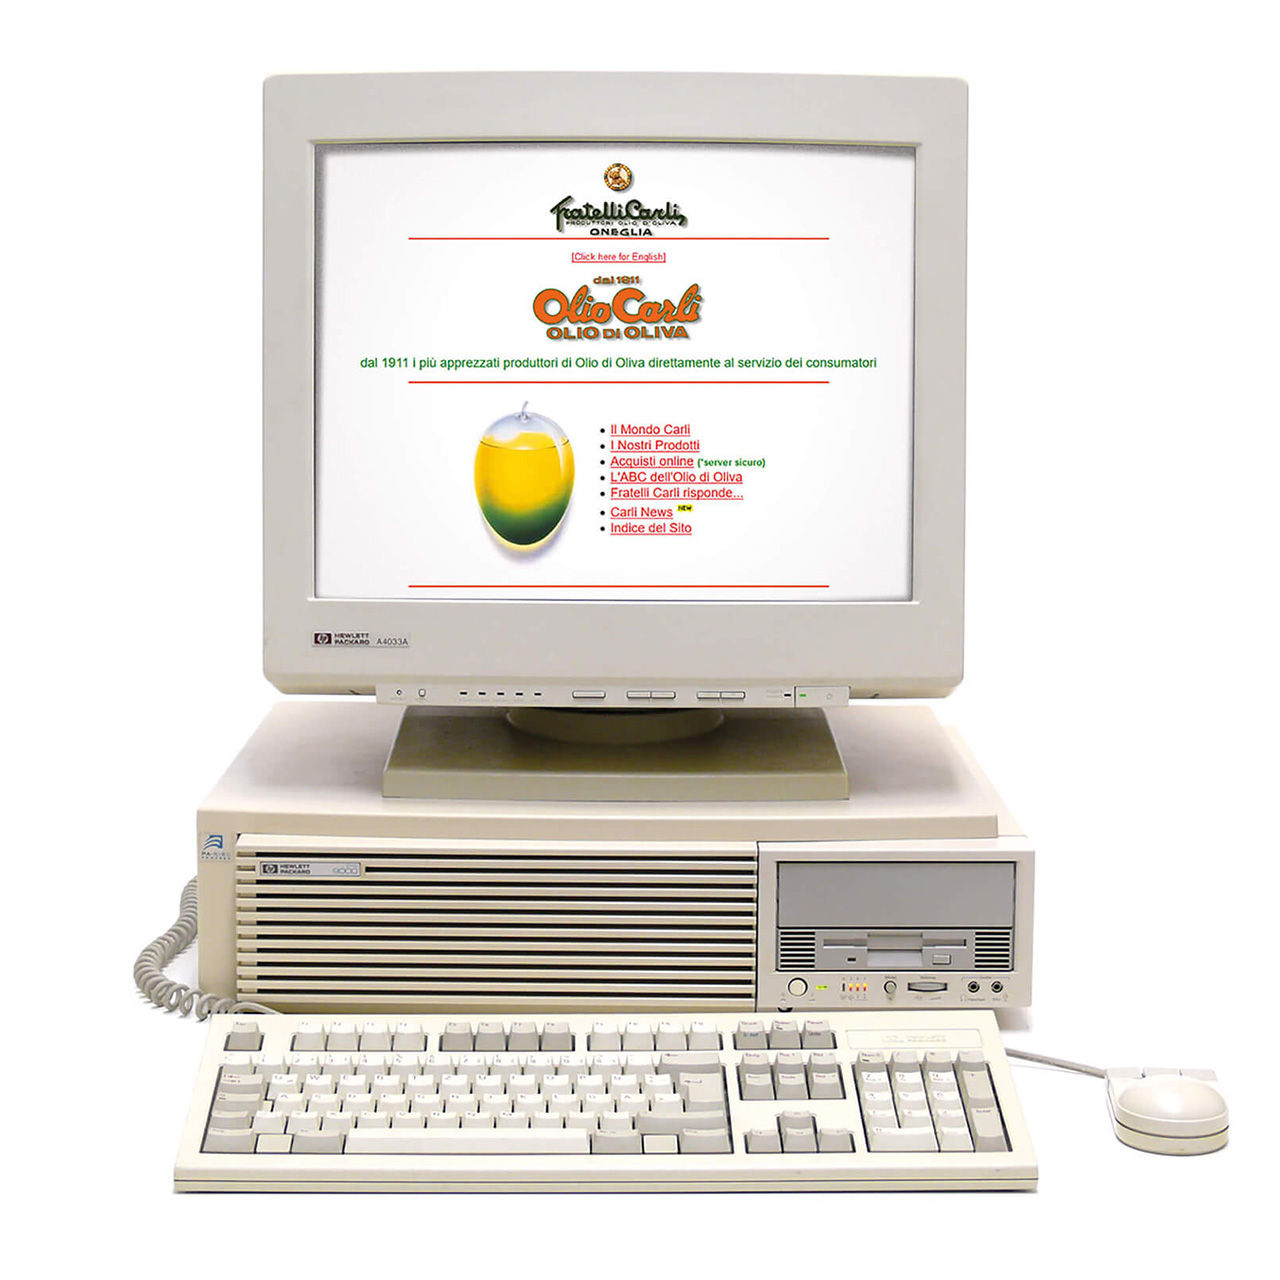 The first website 